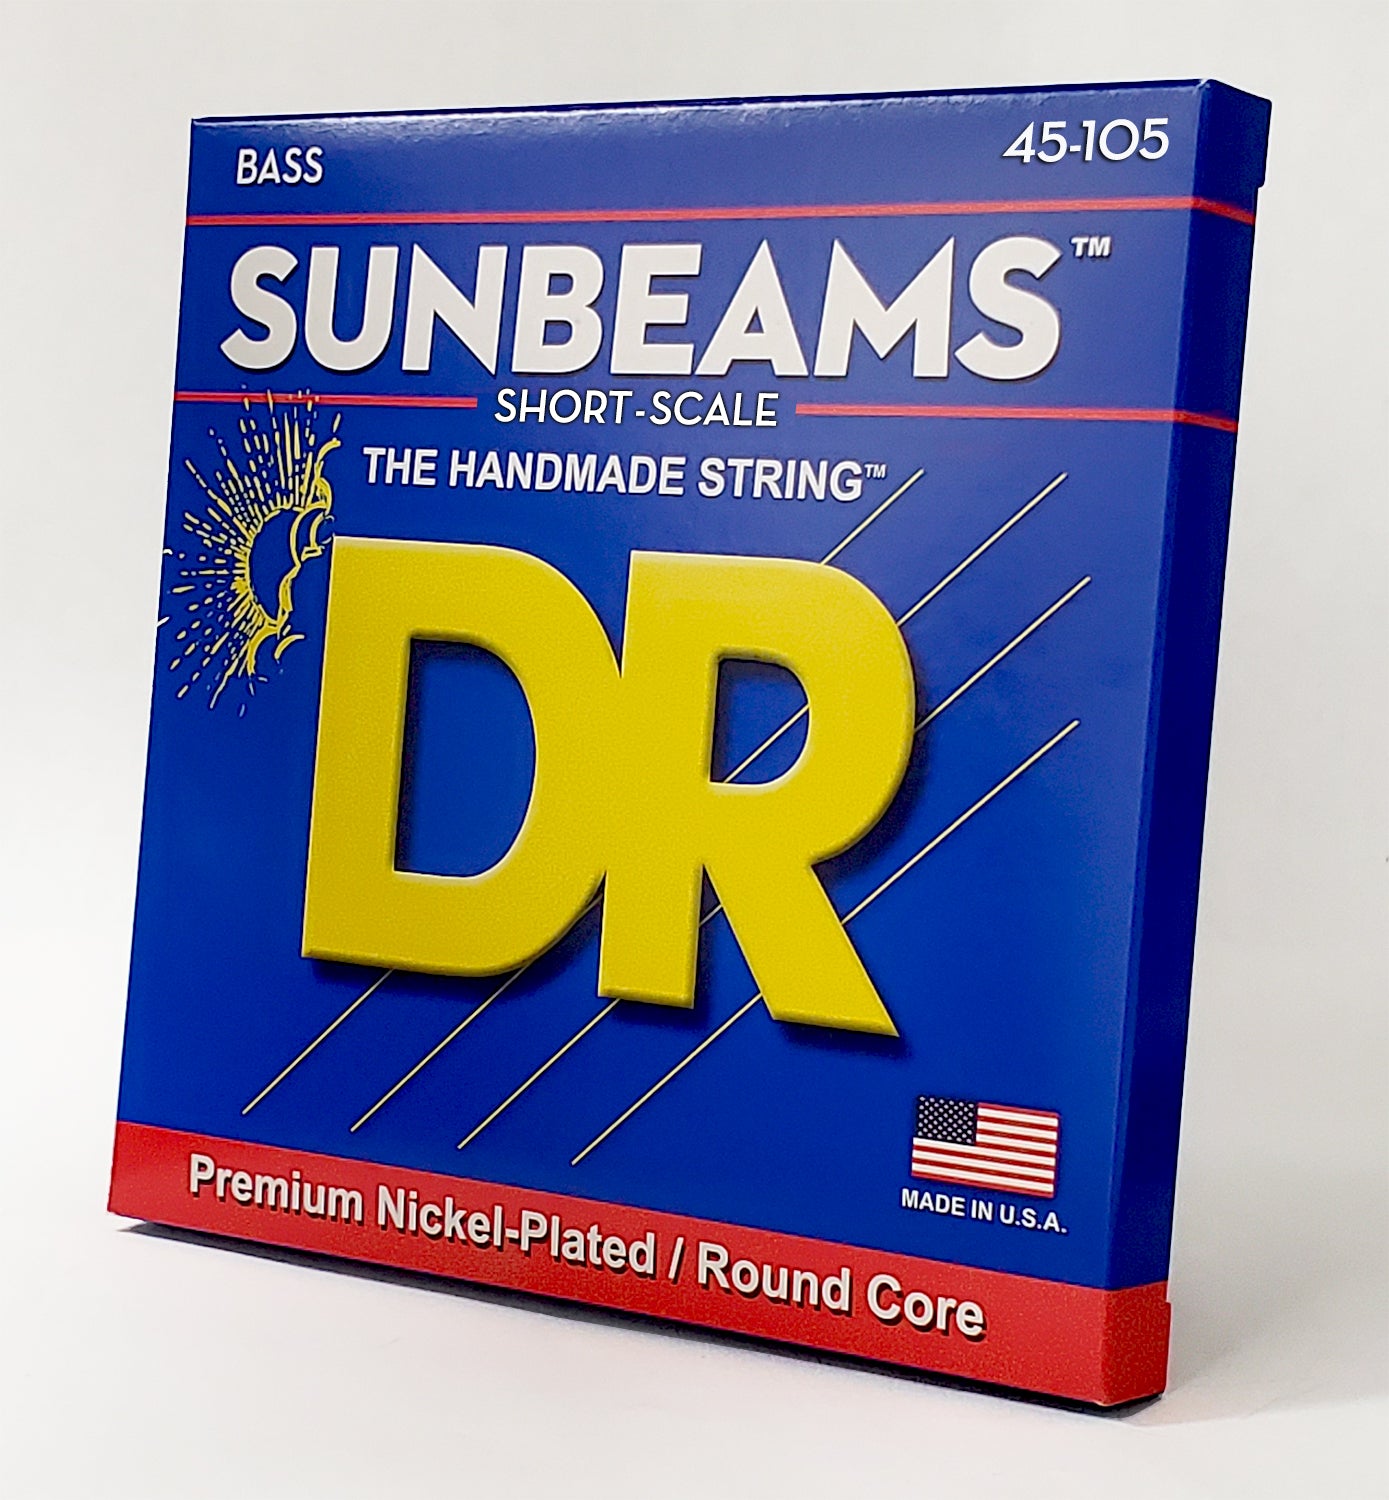 DR SNMR-45 Sunbeams Bass Strings, 4-String 45-105, Short Scale